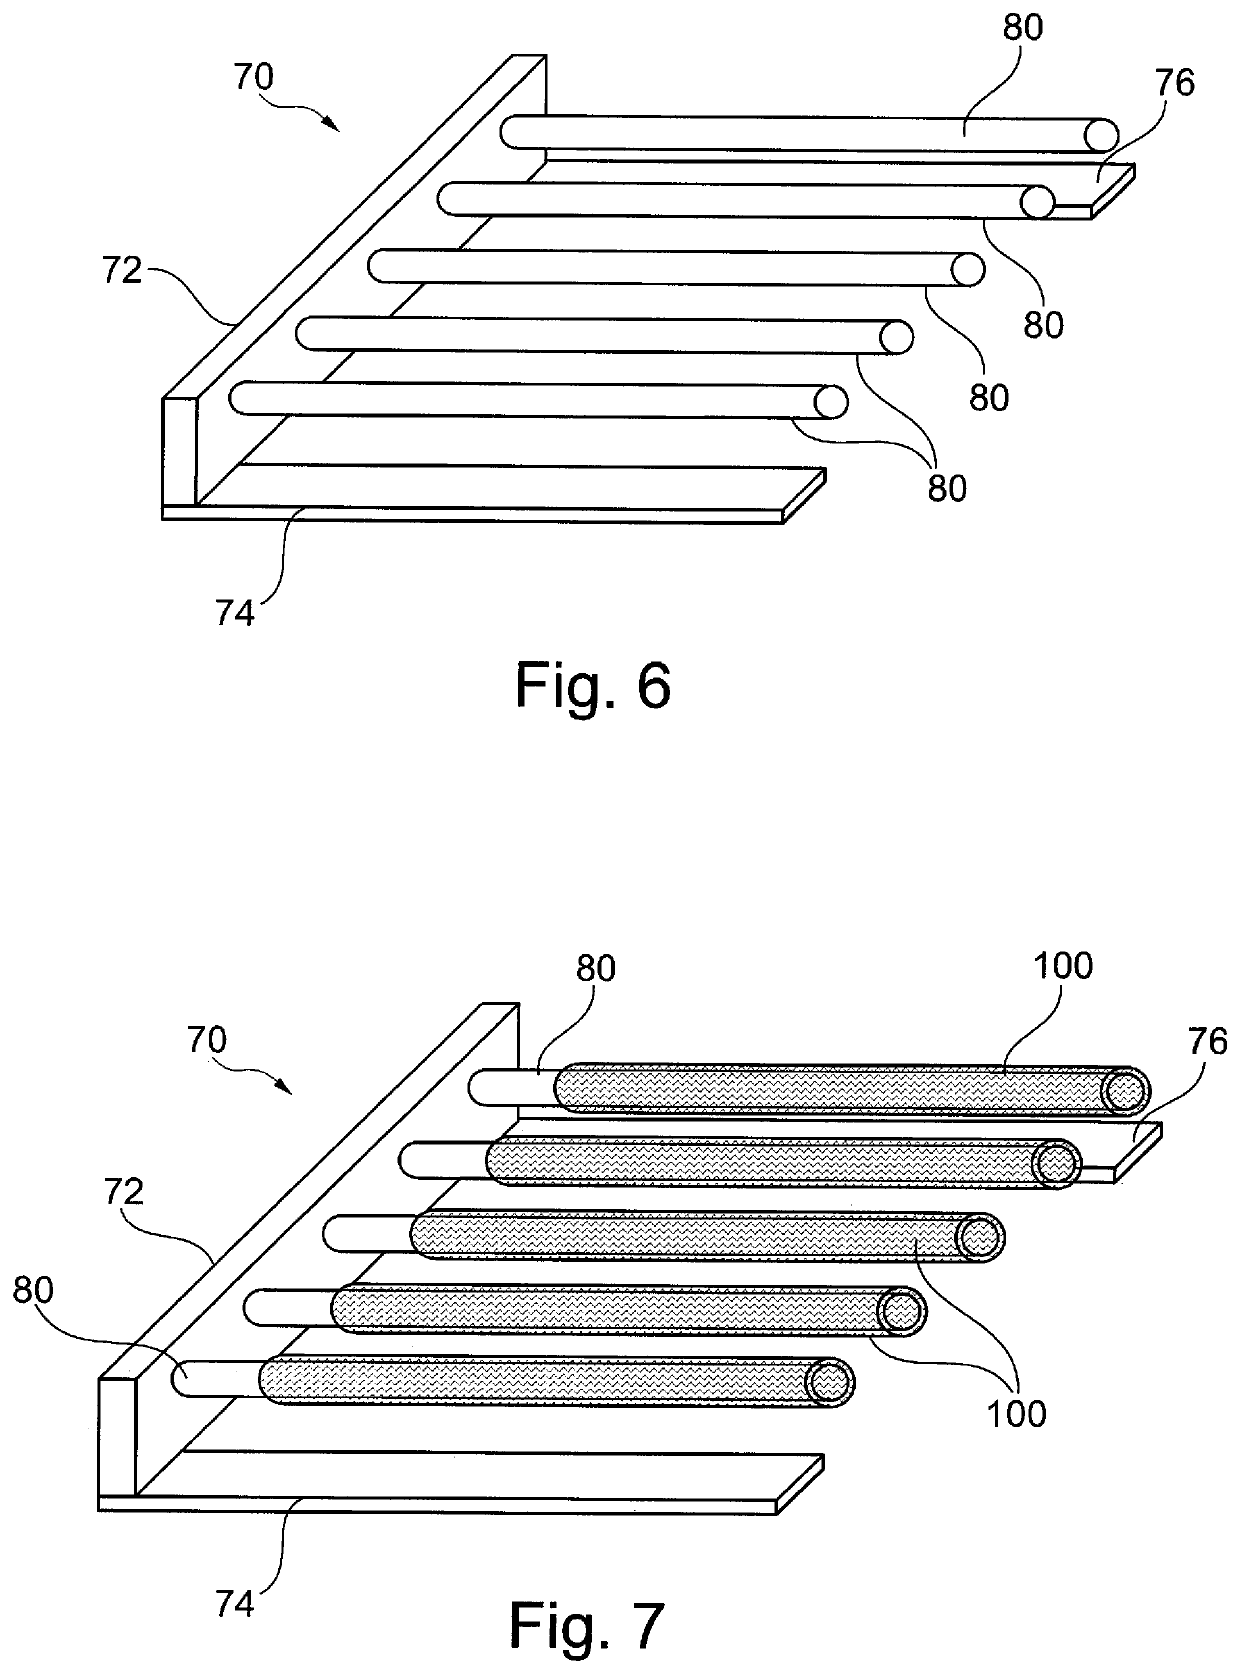 Implantable medical device with differentiated luminal and abluminal characteristics